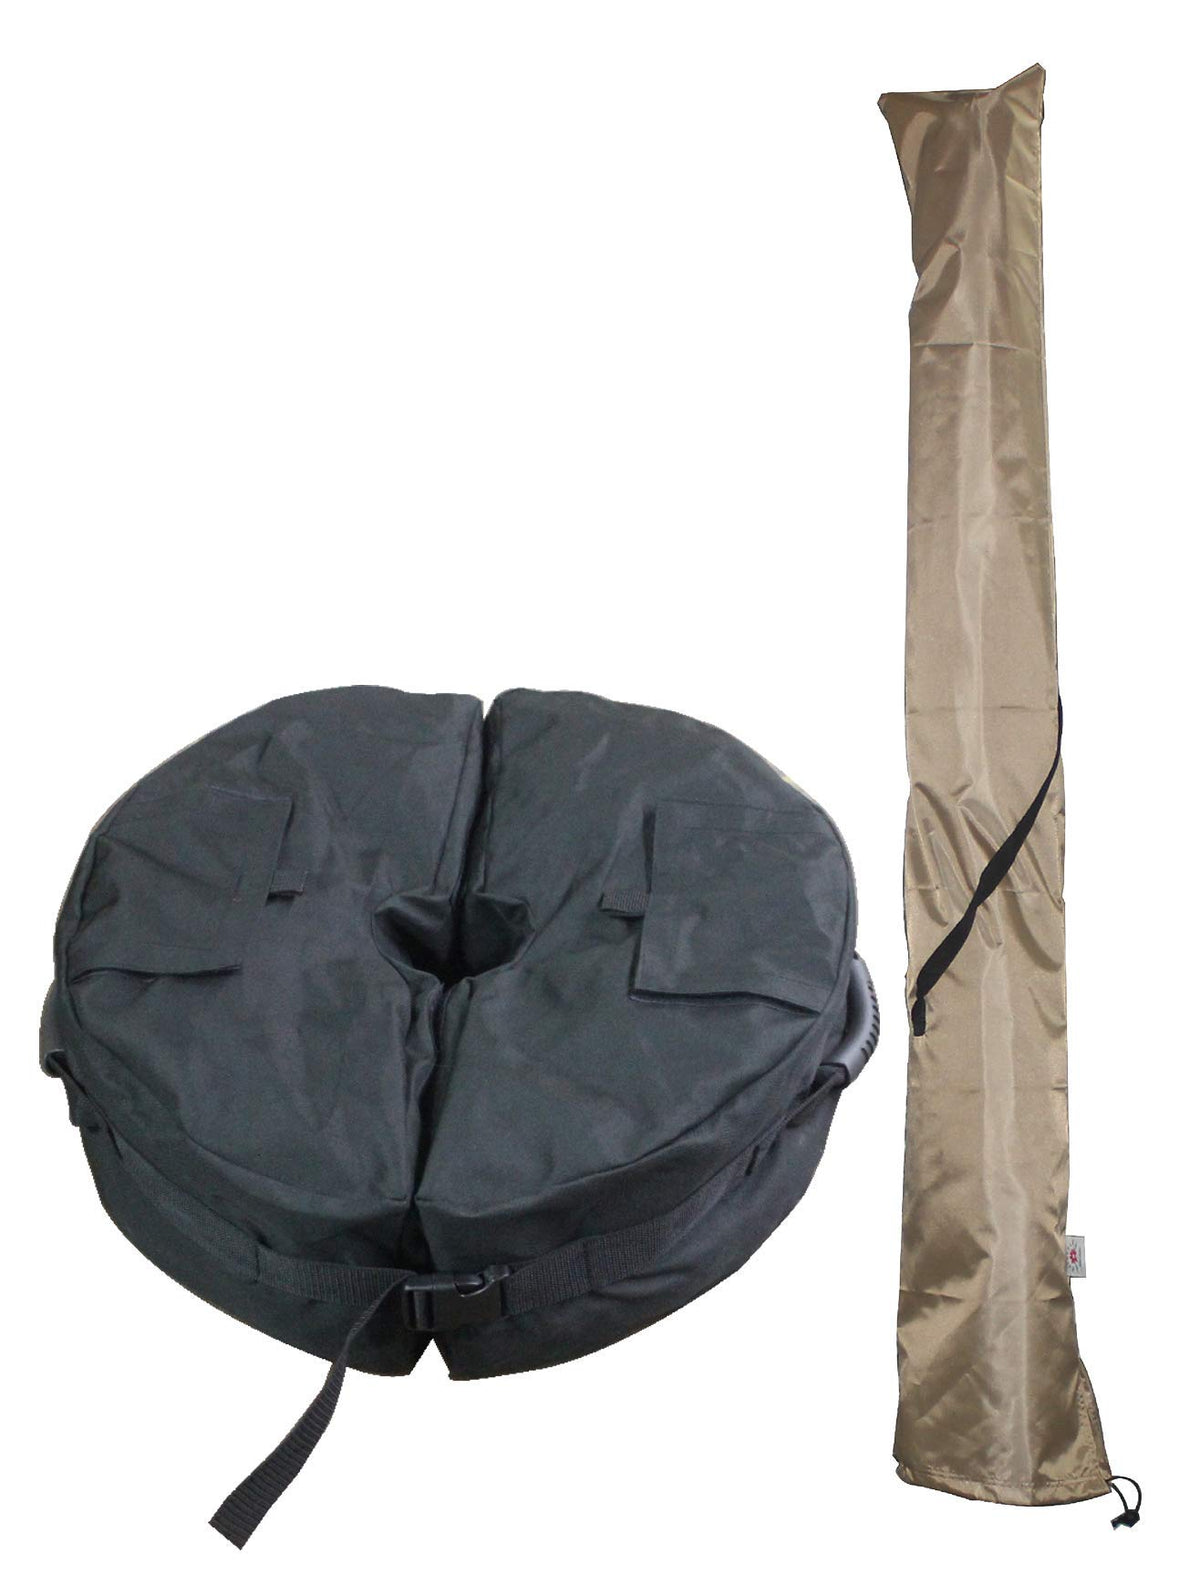 Umbrella Base Weight Bag &amp; a Water Proof Patio Umbrellas Cover - Detatchable Heavy Duty Sand Fillable Bag Anchor with Big Opening Strong Handles for Cantilever Offset Outdoor Beach Parasol Holder